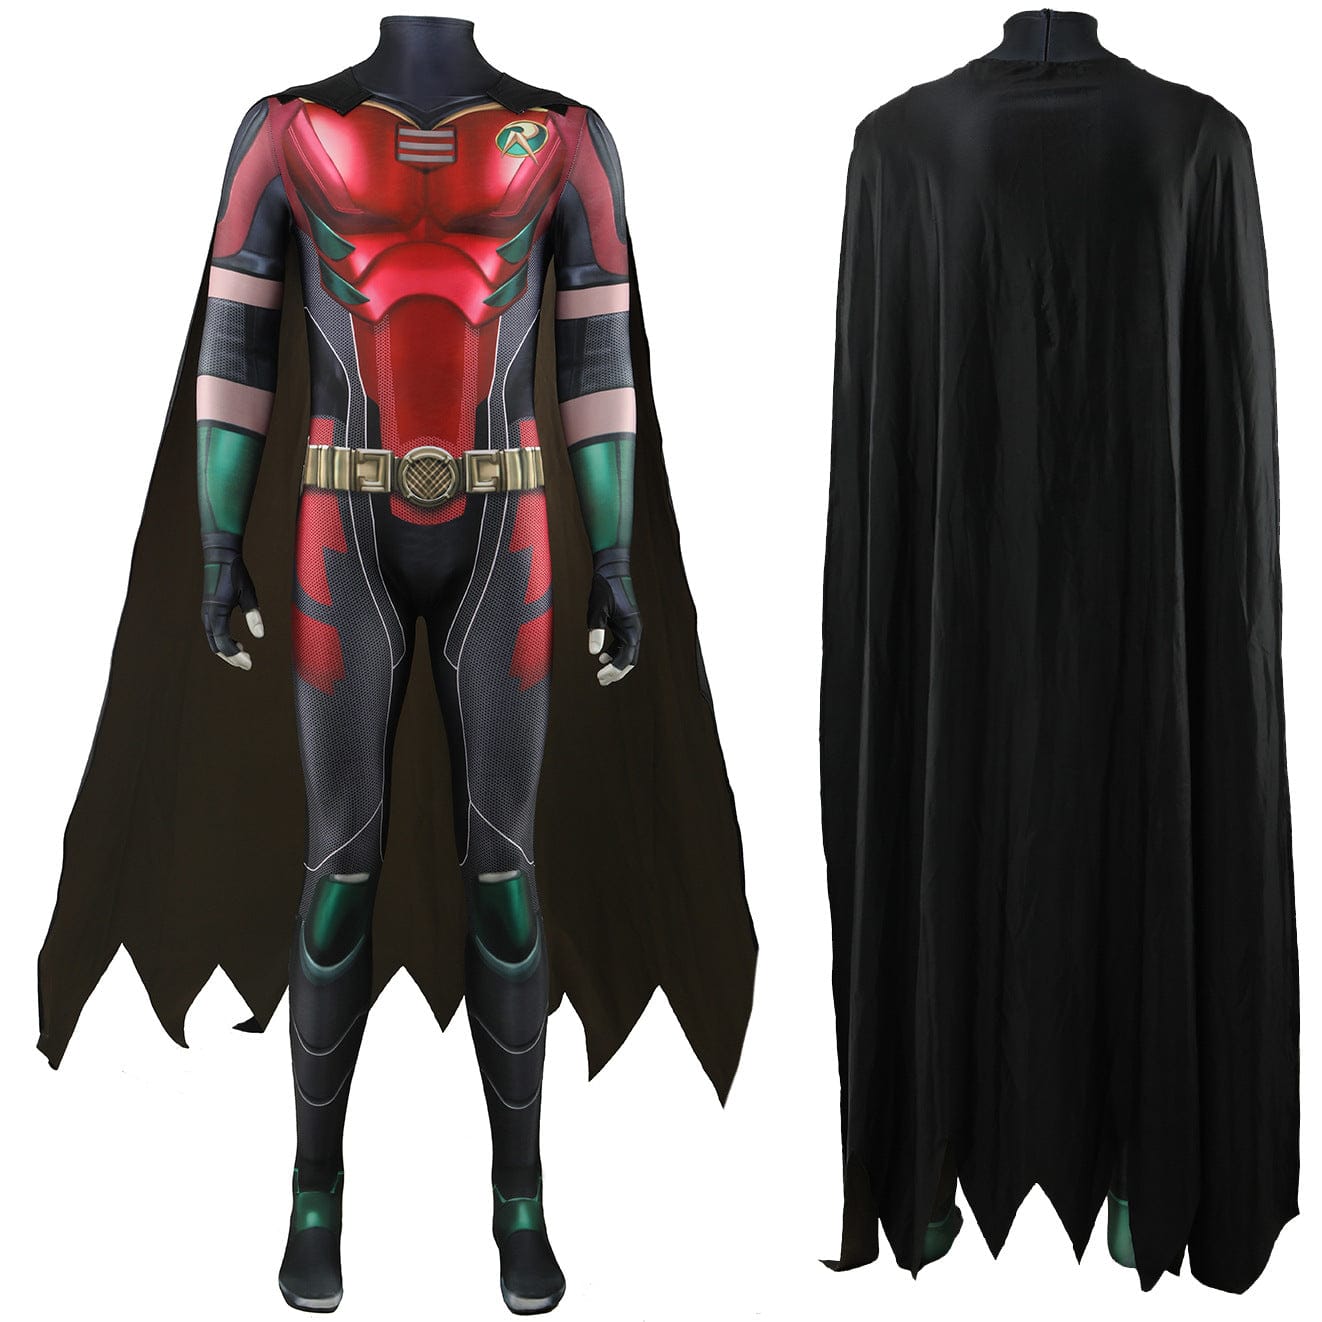 Robin Nightwing Jumpsuits with Cloak Costume Adult Halloween Bodysuit